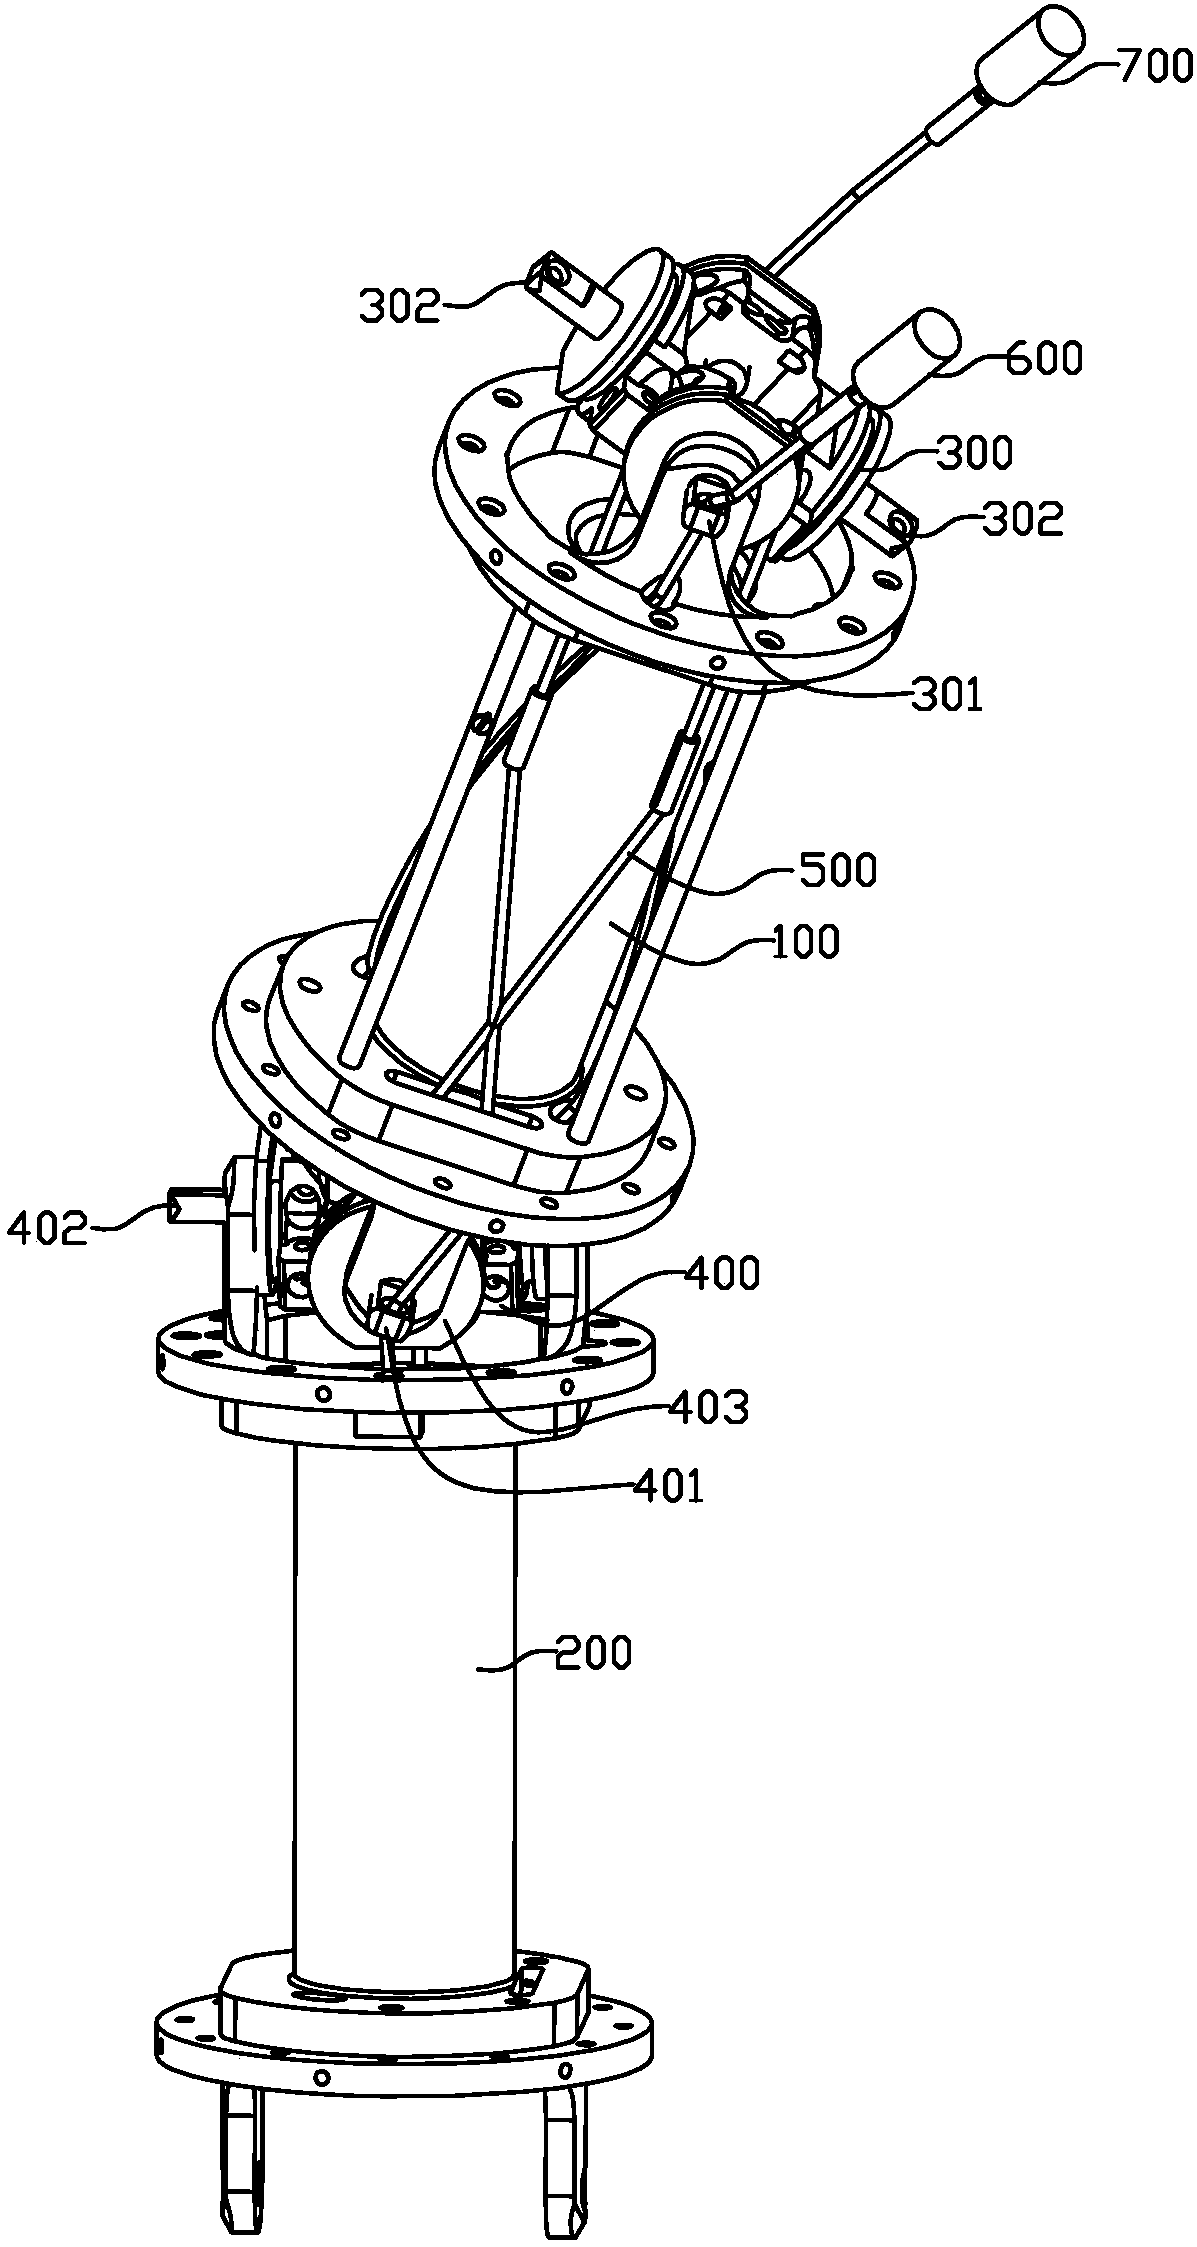 Two-freedom-degree linkage joint section and flexible mechanical arm